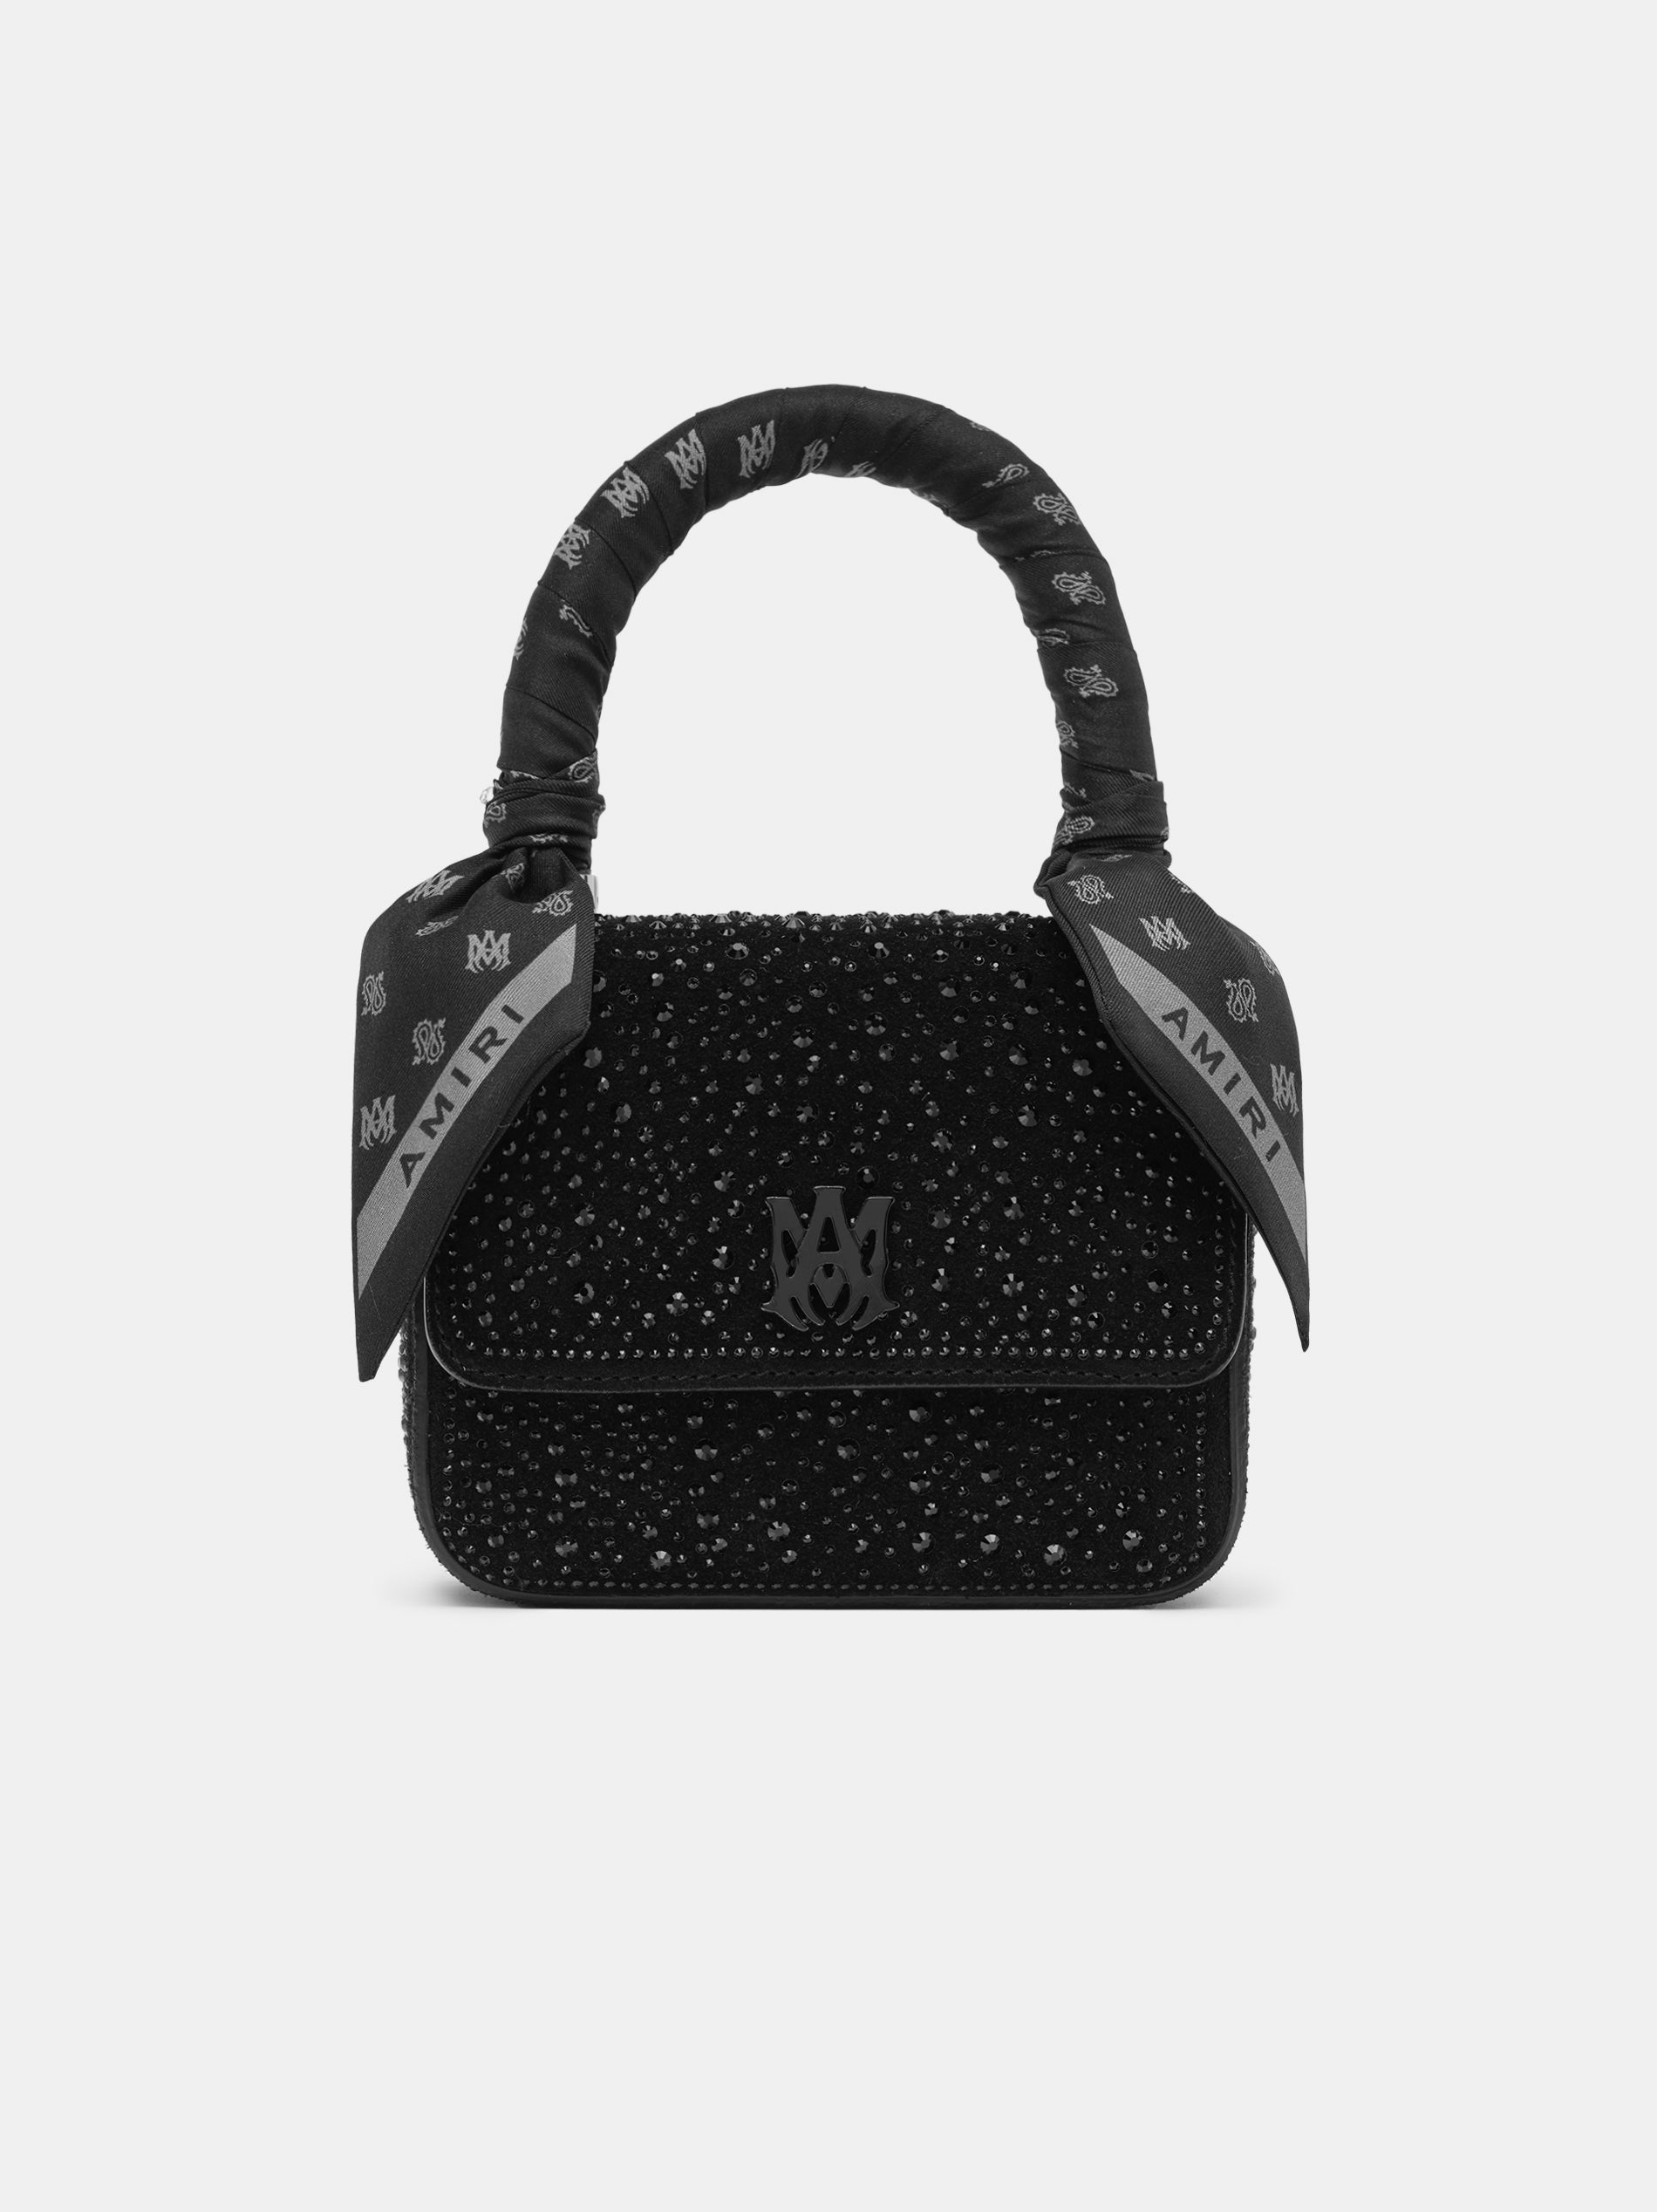 Product WOMEN - CRYSTAL MICRO MA BAG - Black featured image